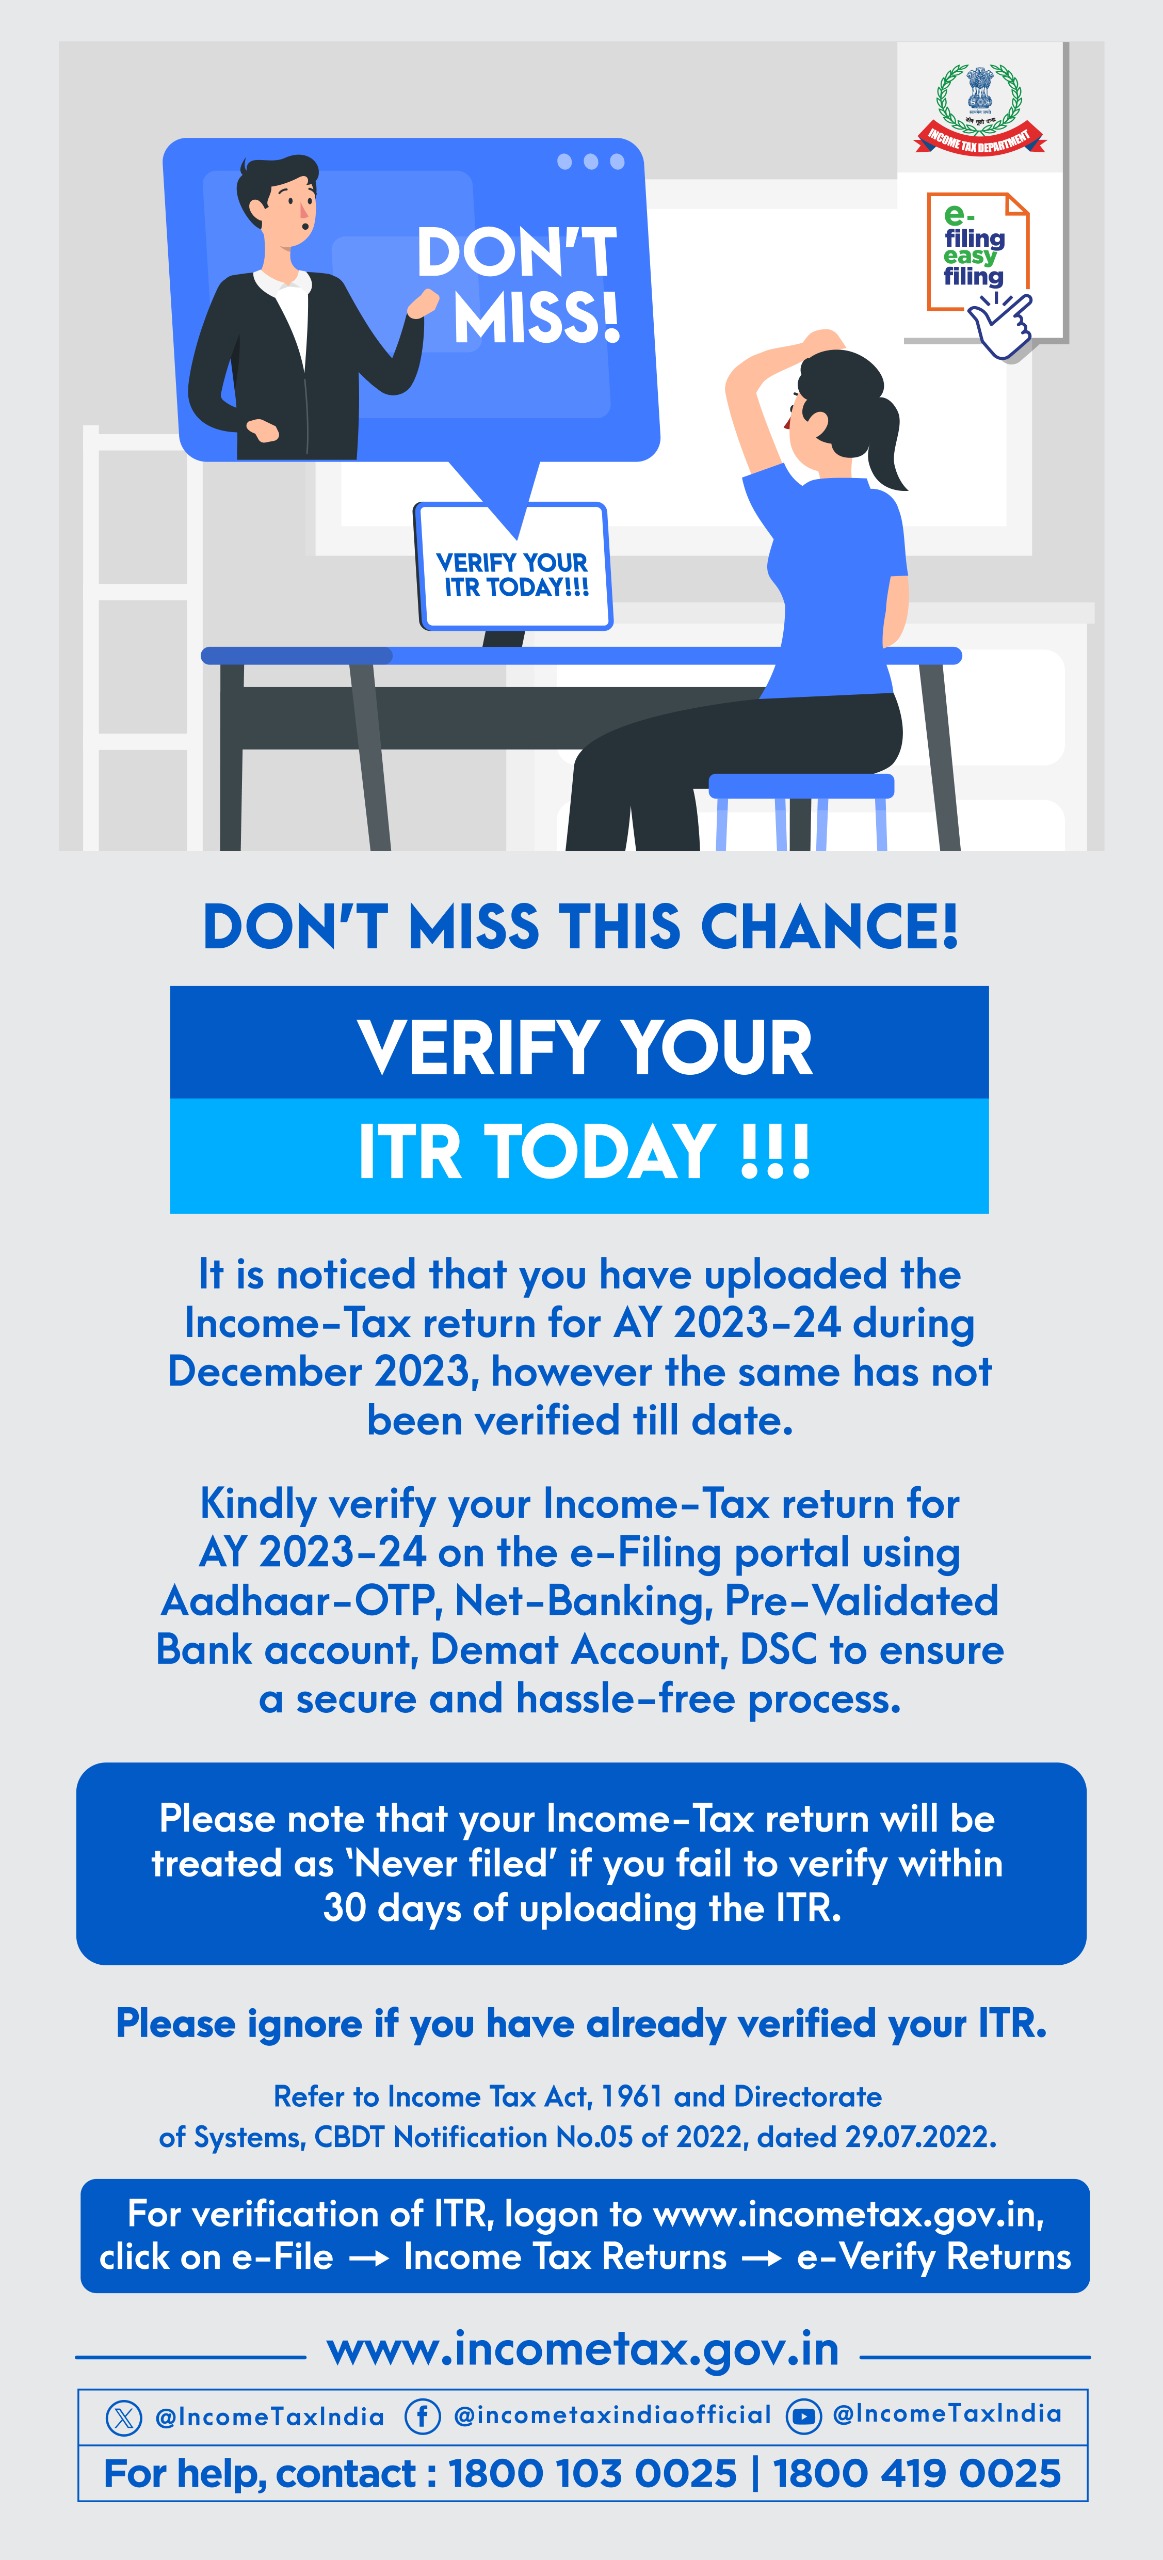 Verify your ITR for AY 2023-24 to avoid last minute rush, Ignore if already verified